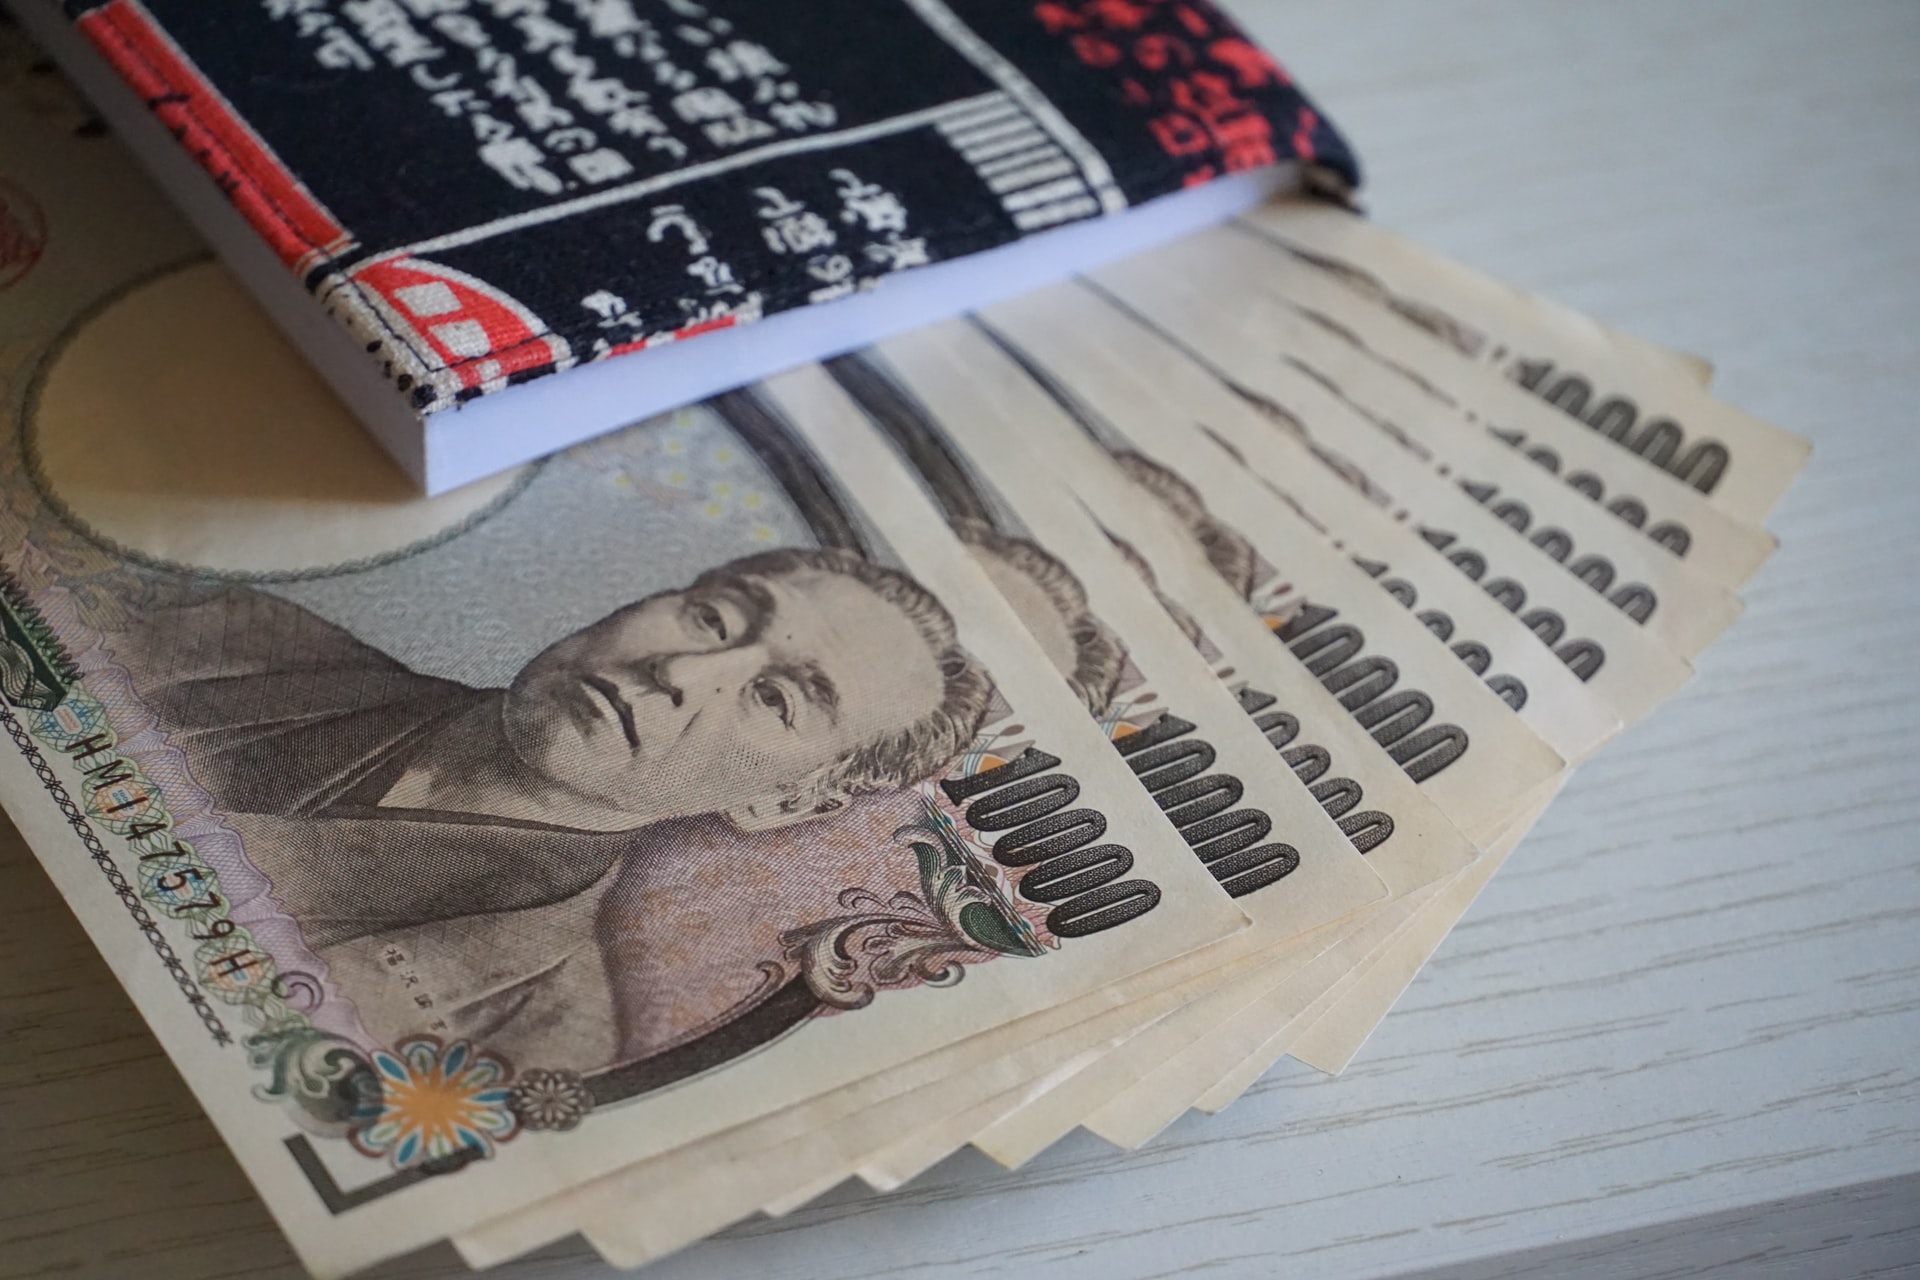 Japan’s Central Bank Has Abandoned Its Digital Currency Plans